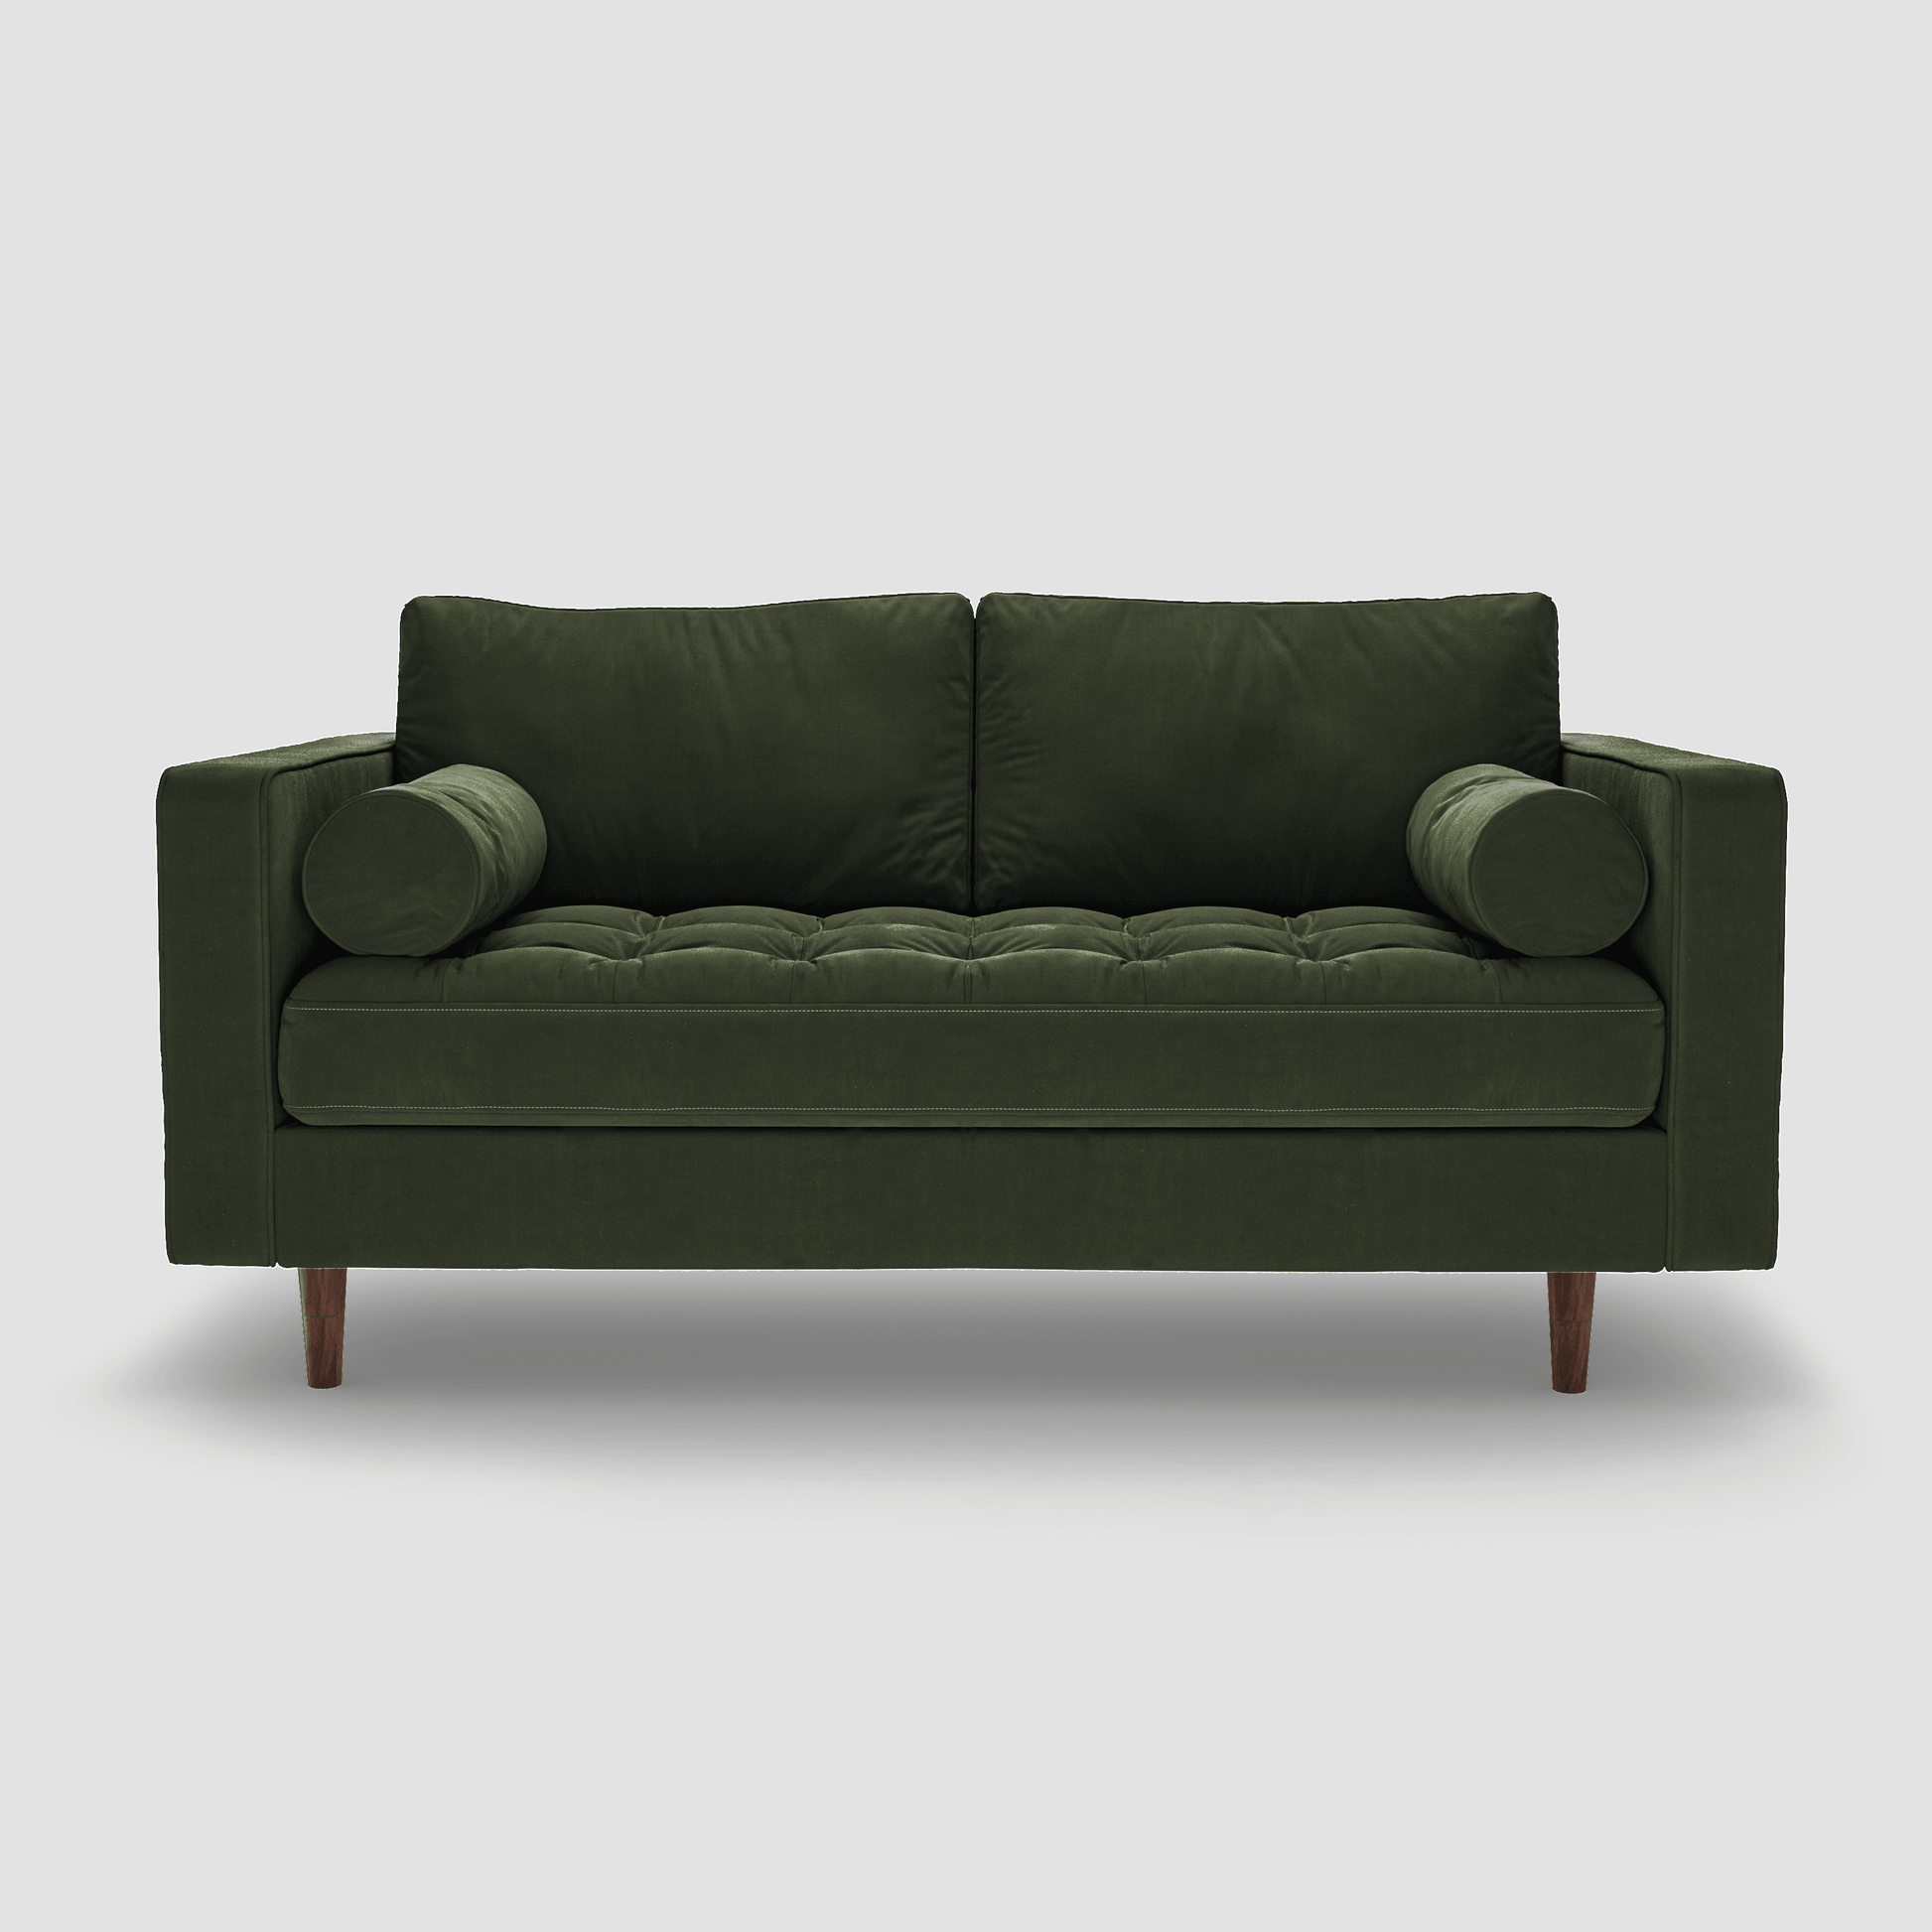 Dalton Large Two Seater Sofa - Flown the Coop